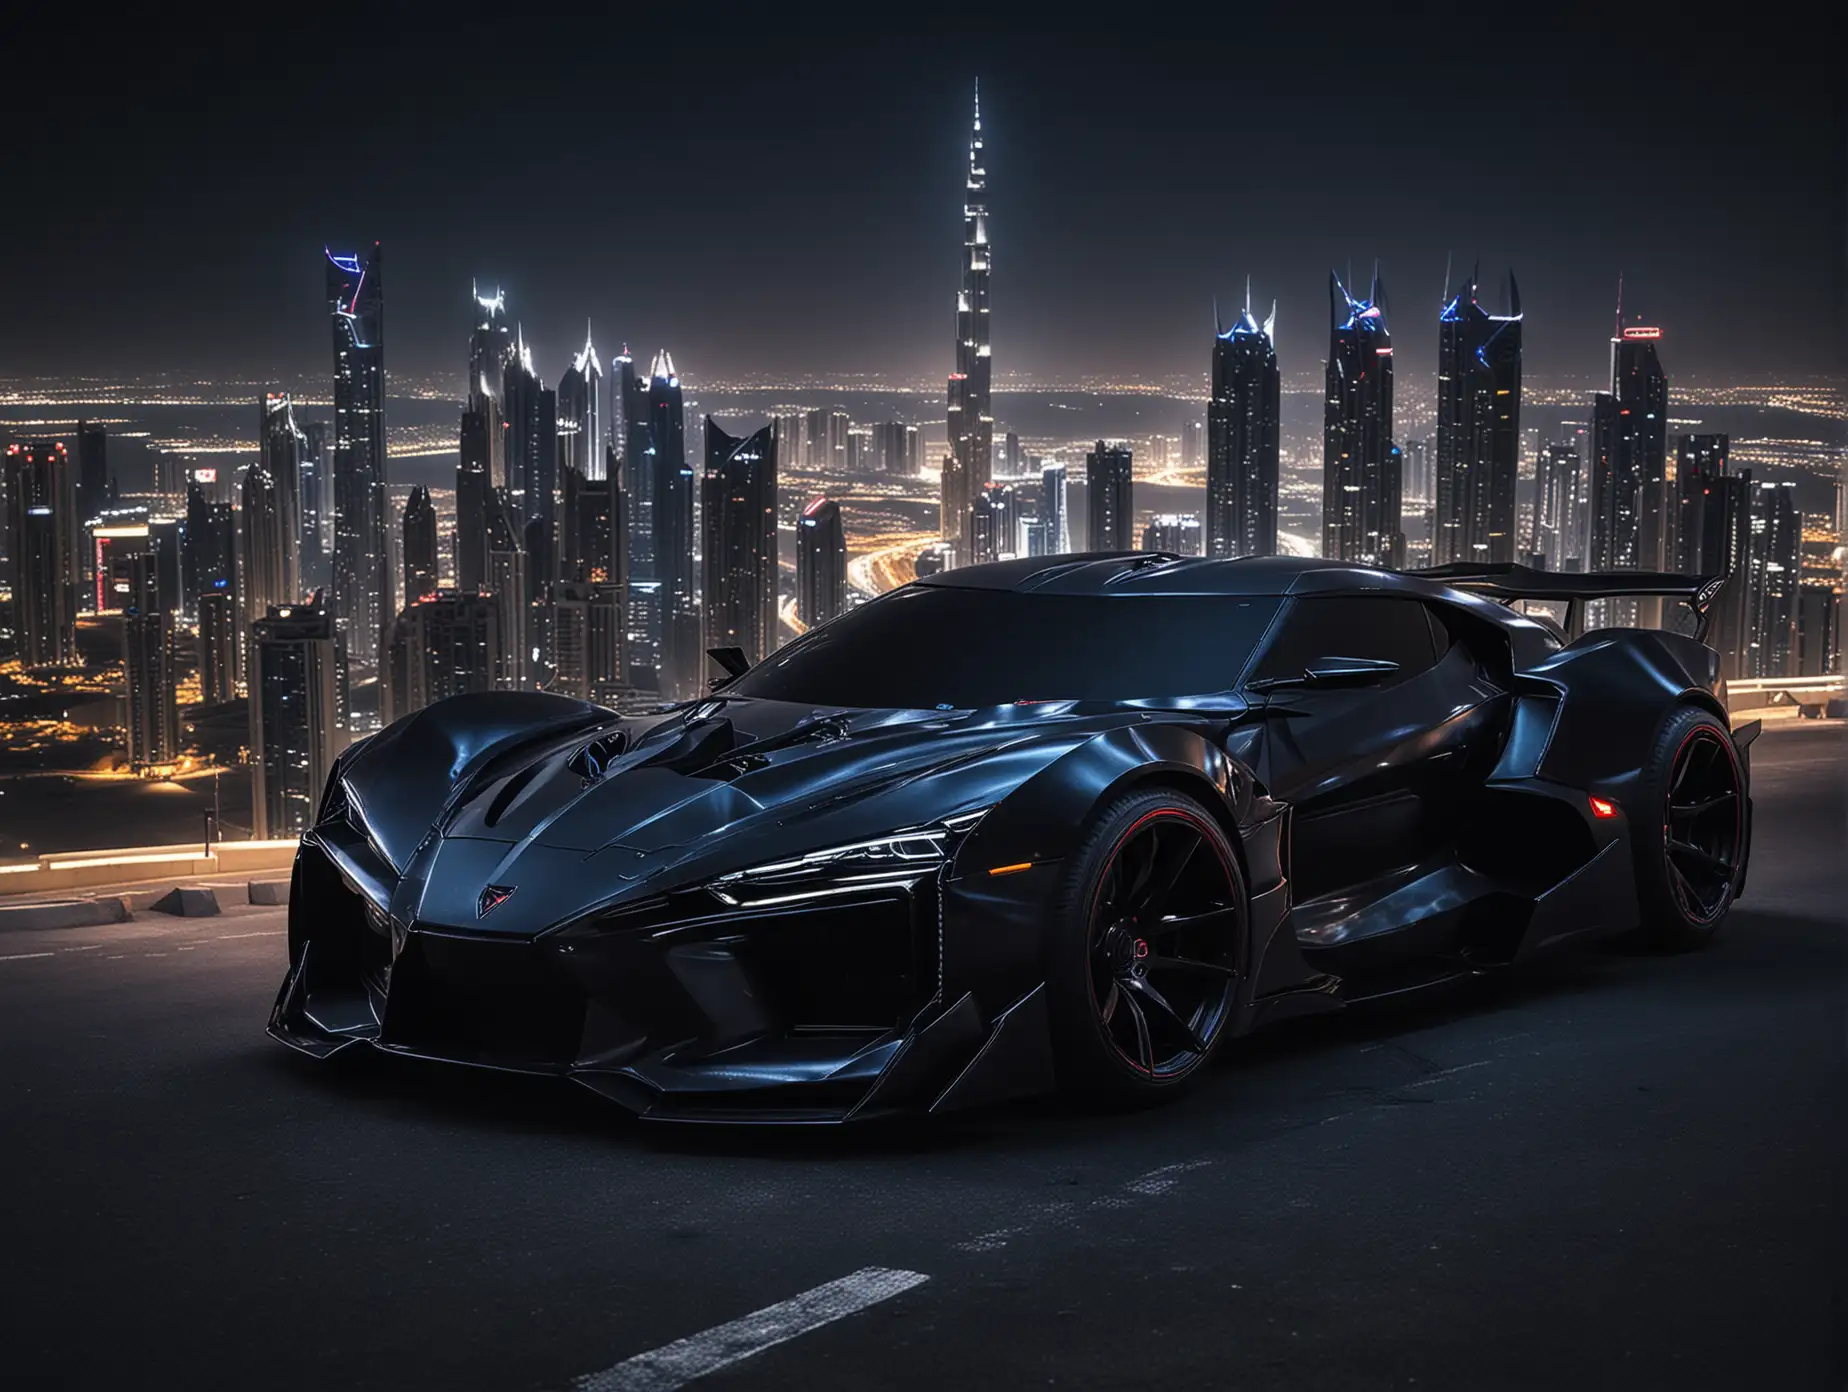 Create  futuristic japanese cars from  lion, tiger, batman & spiderman evil tuning type Downhill in the city of dubai rear view from high far away,  car color dark black,  dark blue car lights